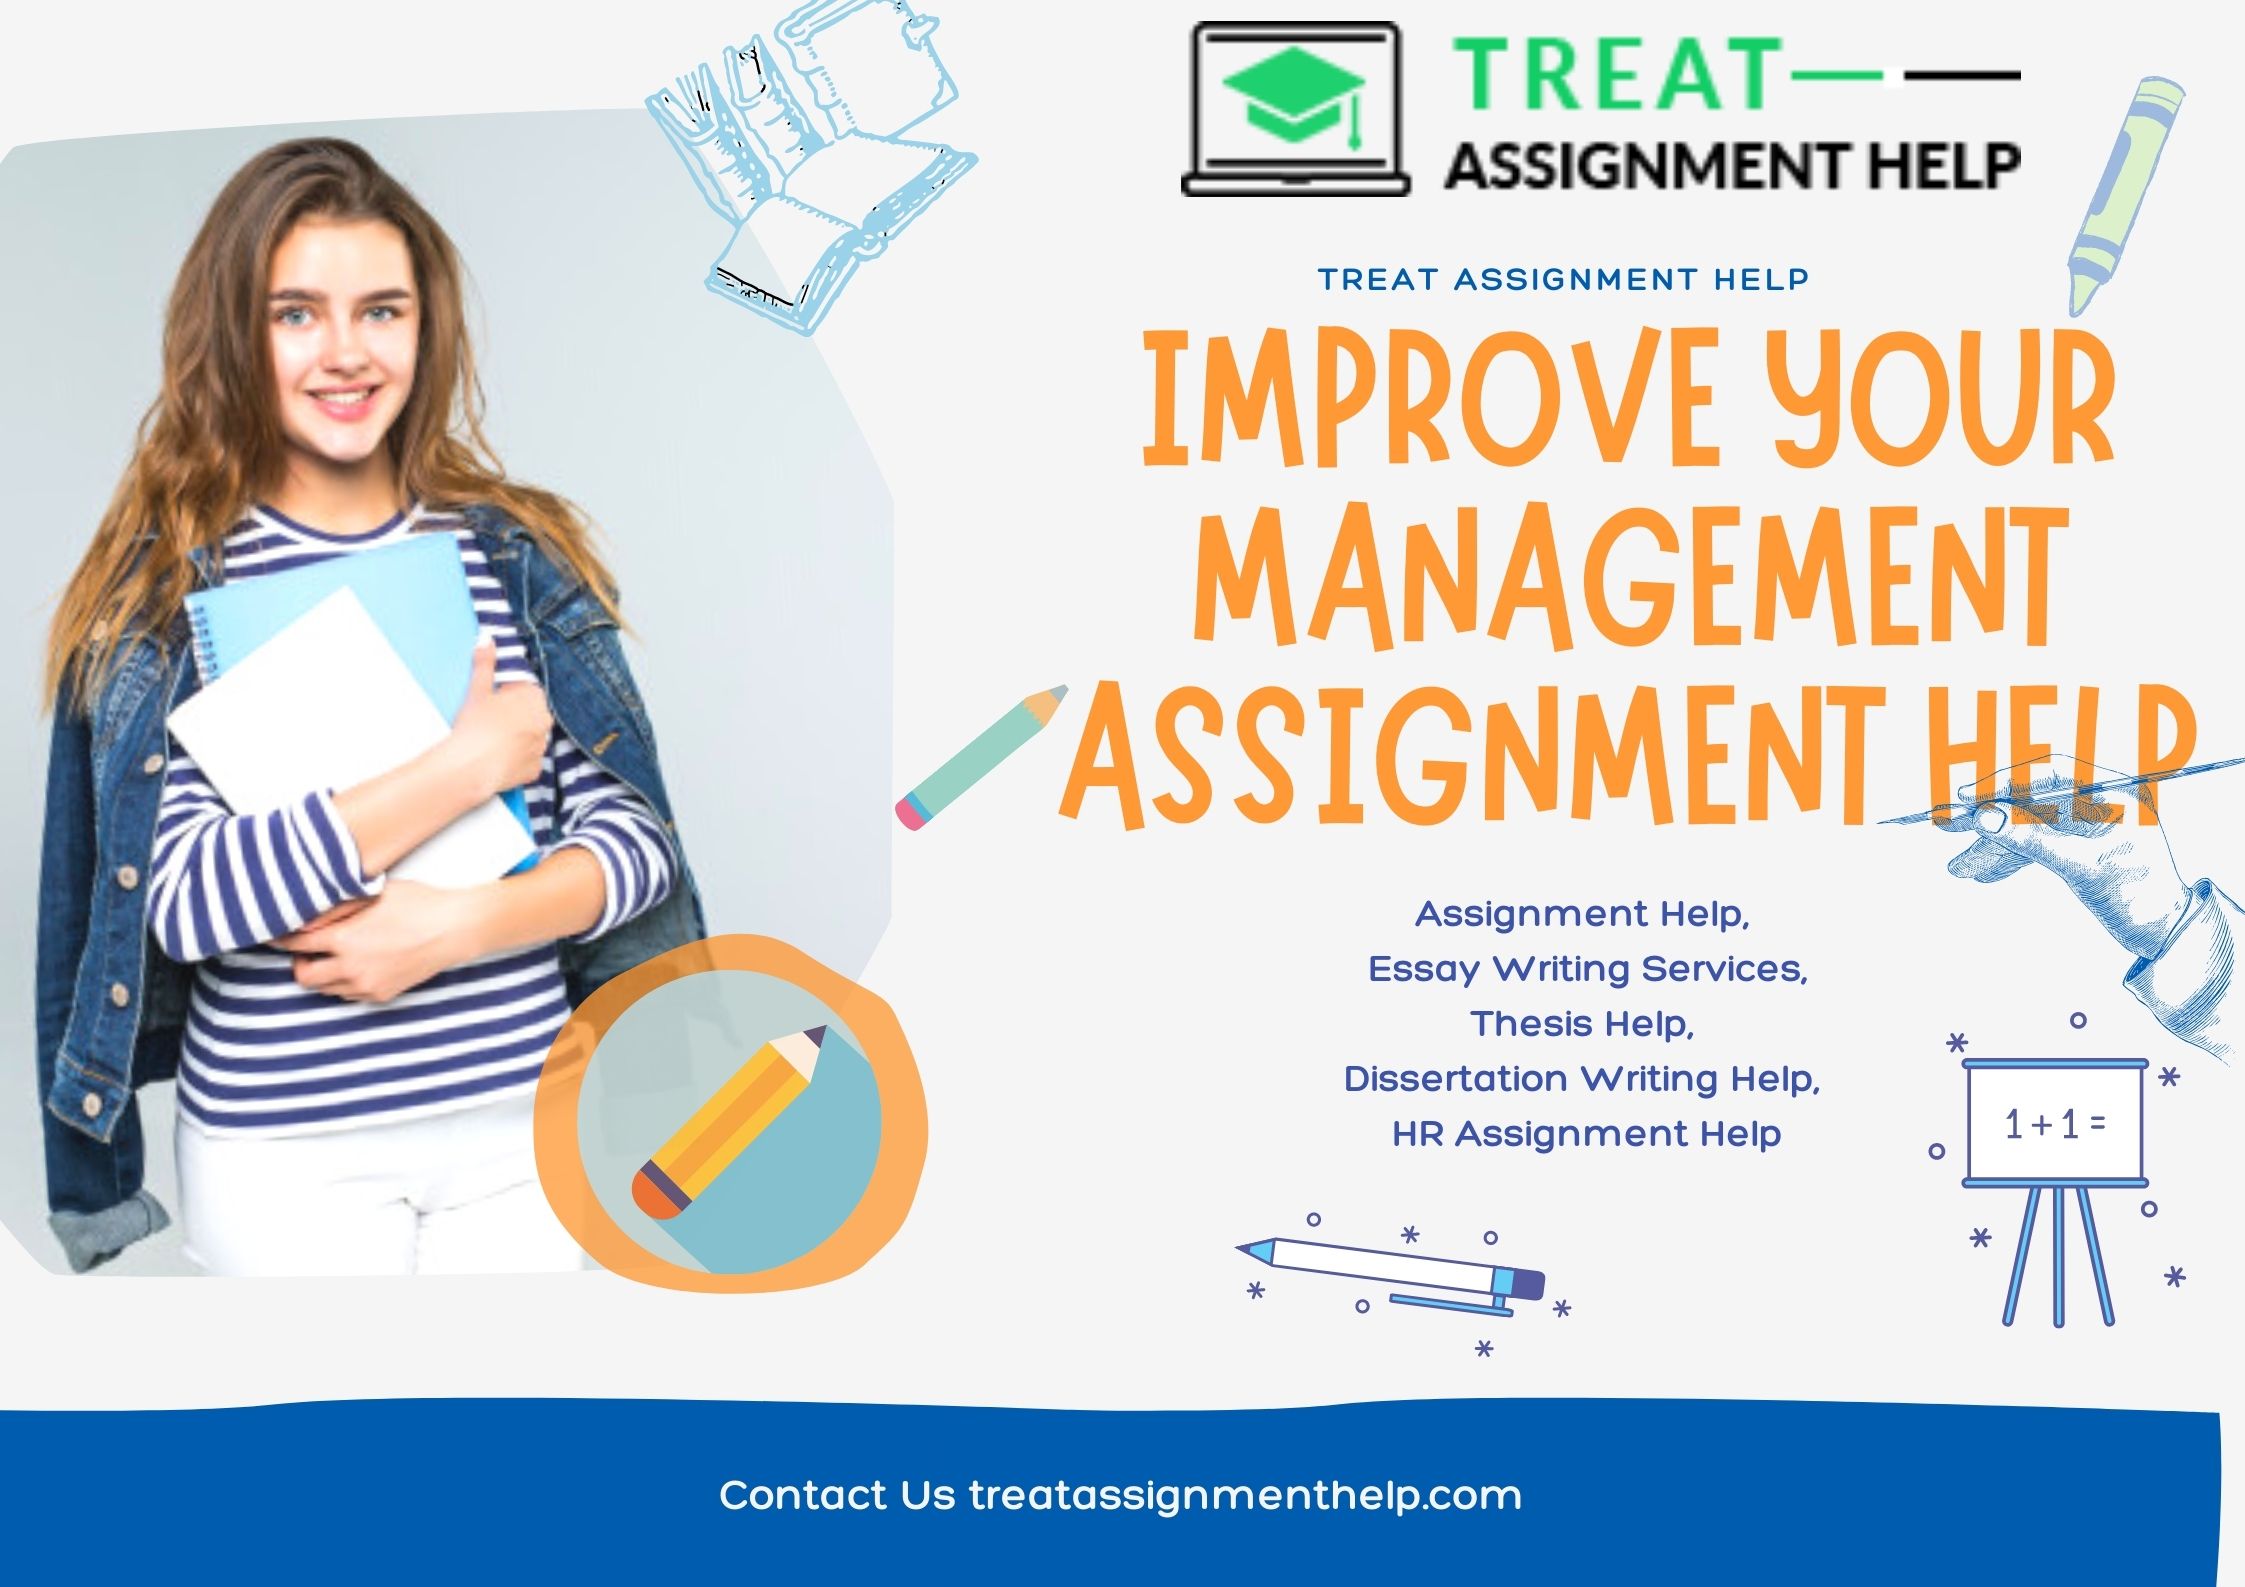 What Are The Effective Tips To Write The Best MBA Assignment Paper?